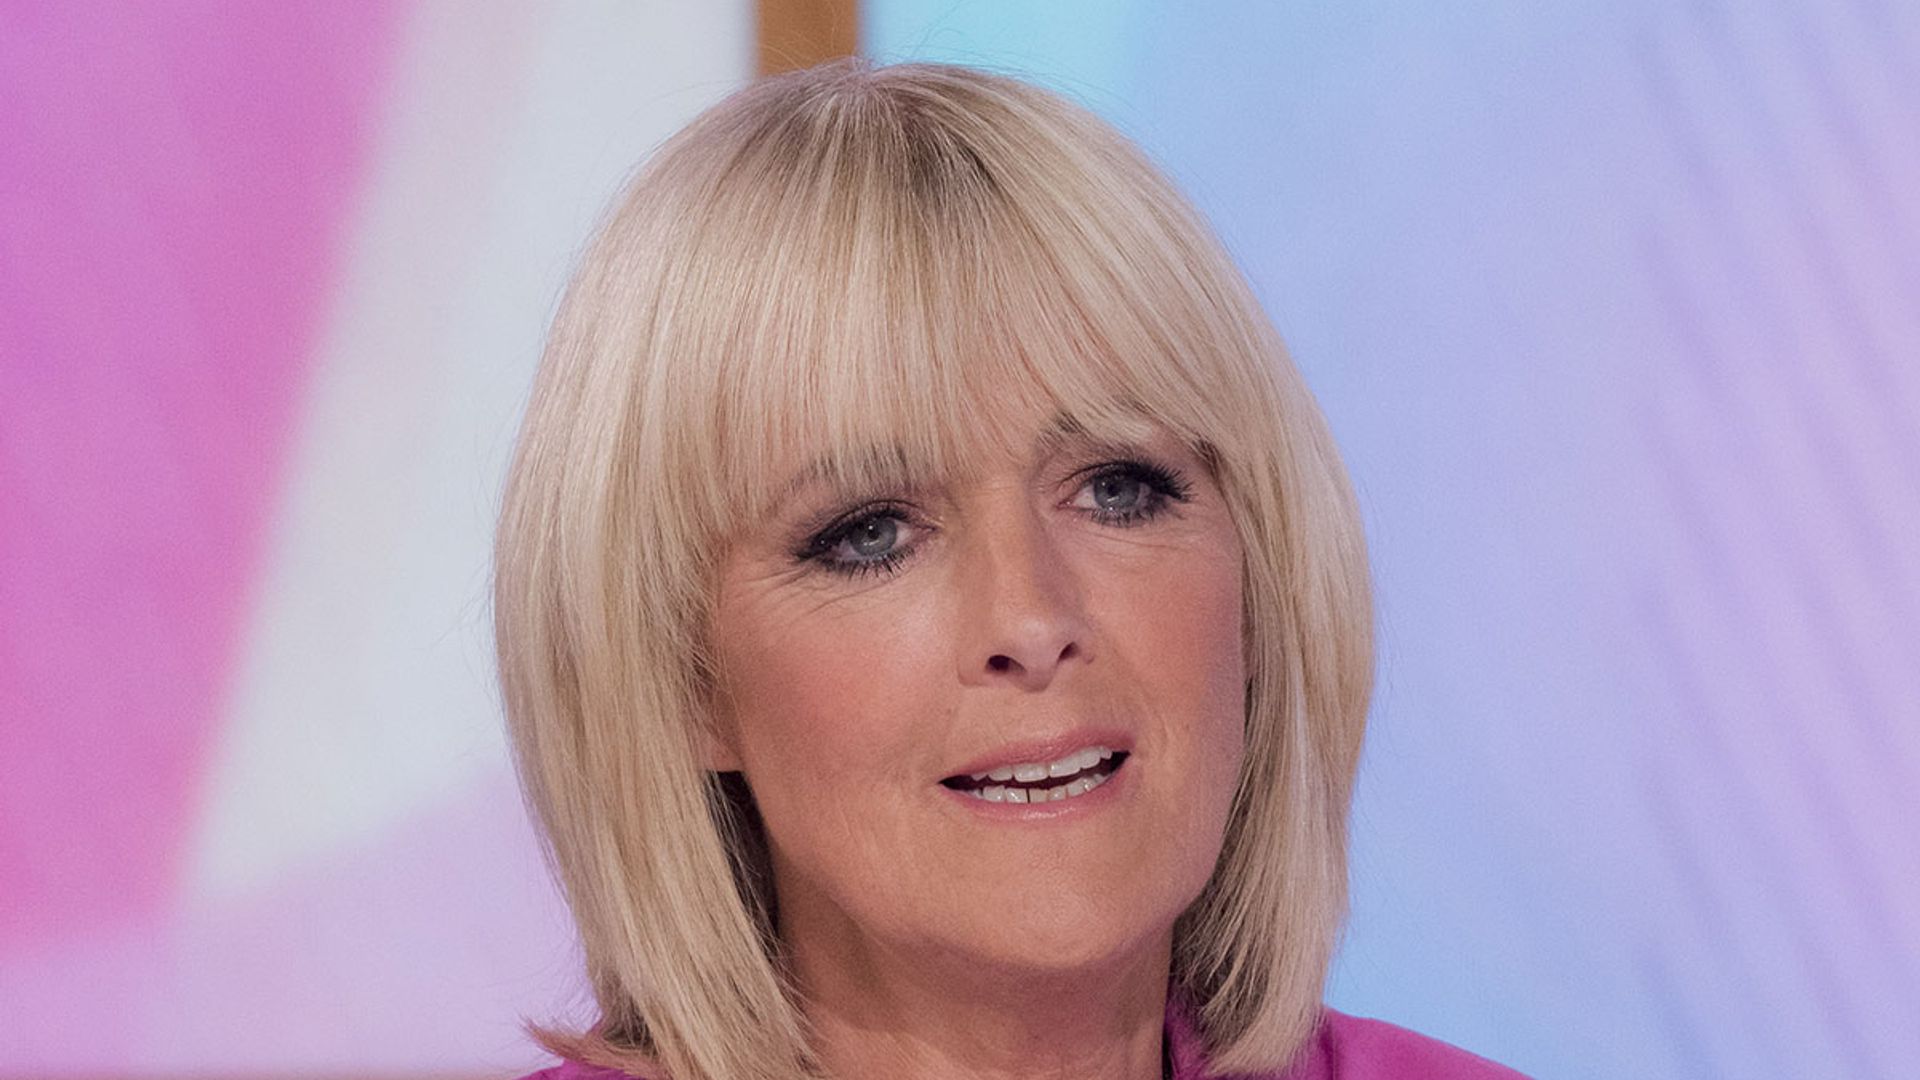 Jane Moore lights up Loose Women in the brightest suit we've ever seen